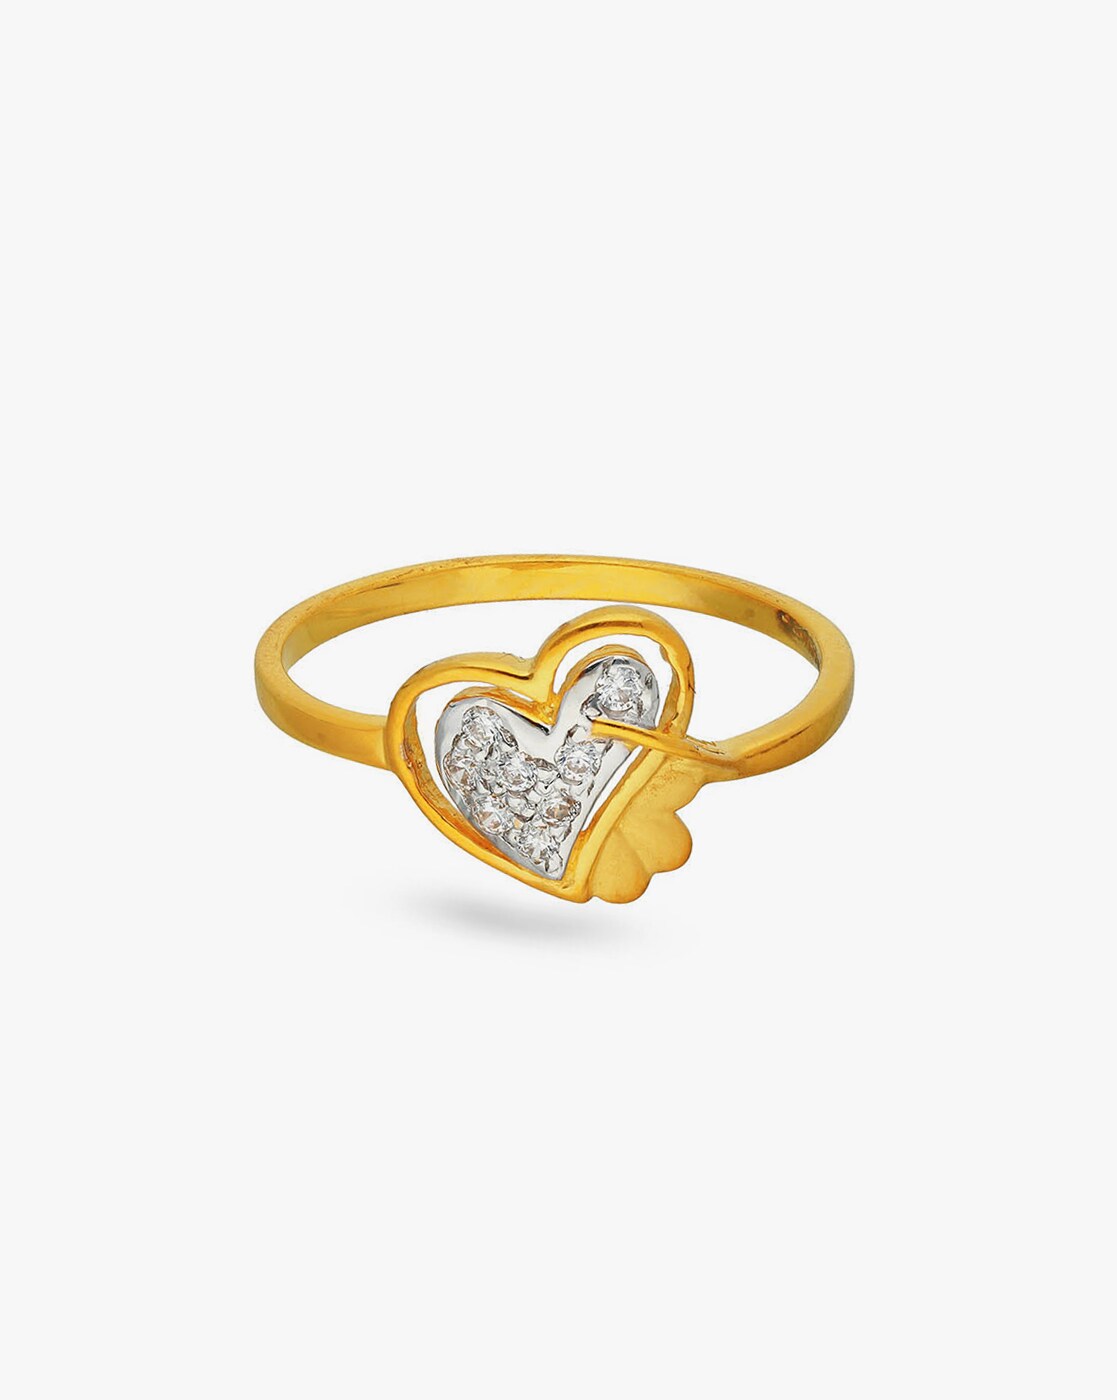 Don't settle for normal. | Wedding rings, Cute engagement rings, Gold ring  designs